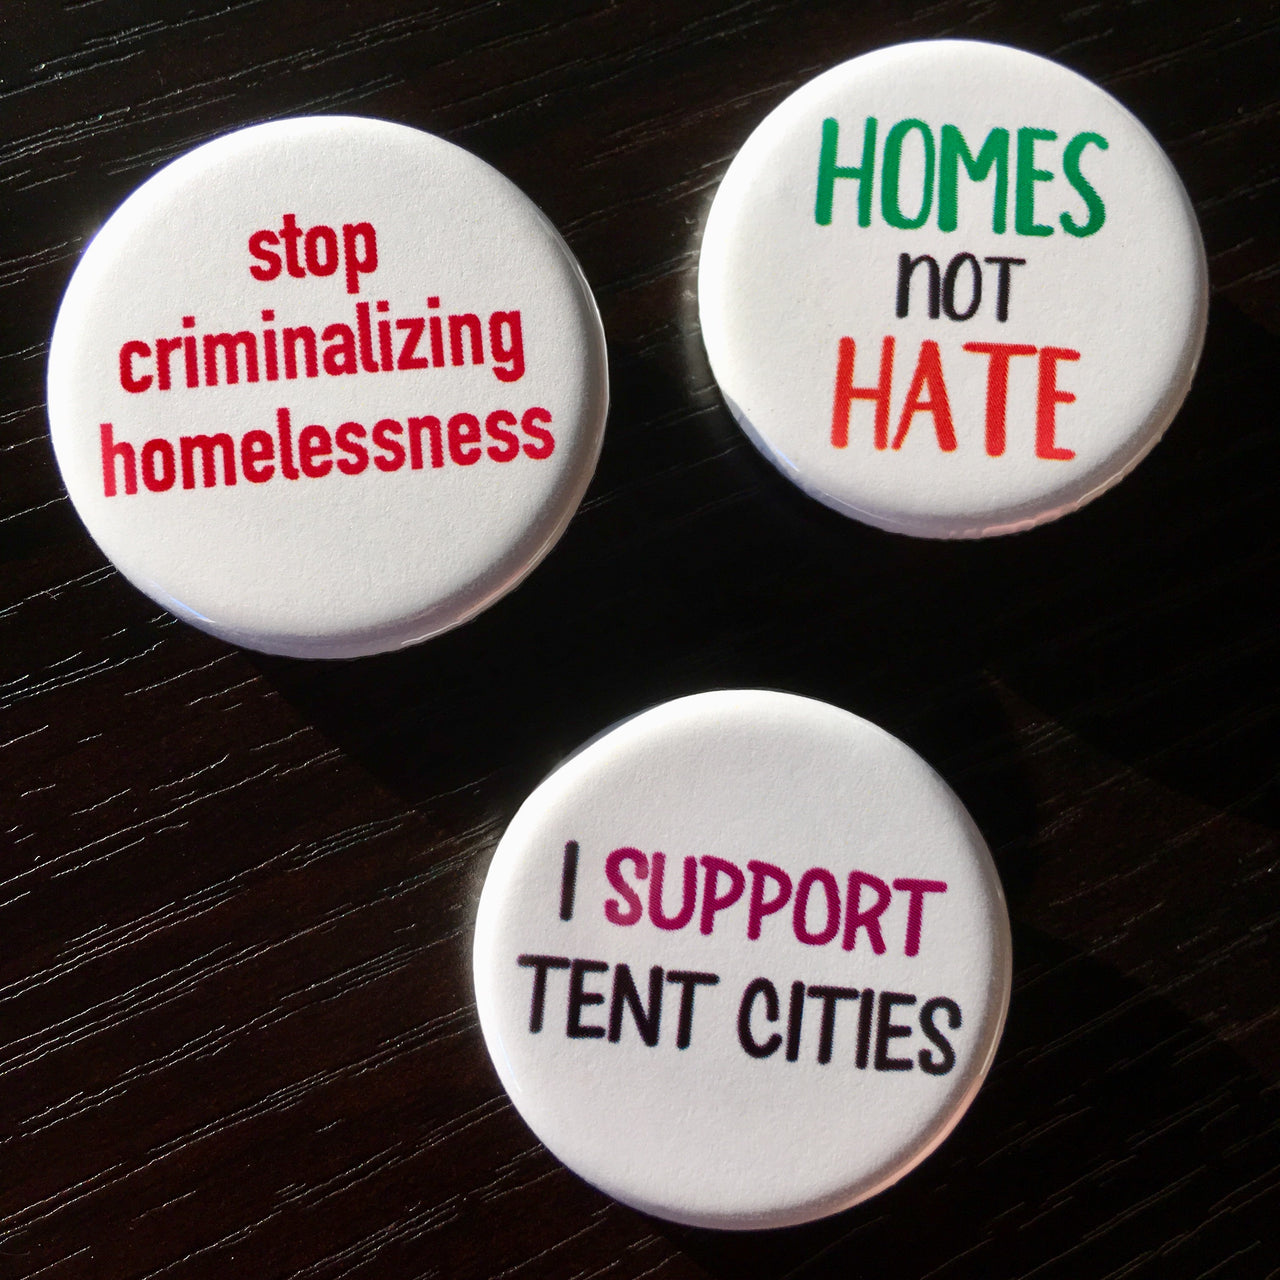 Charity buttons! Support the homeless and tent cities - Radical Buttons